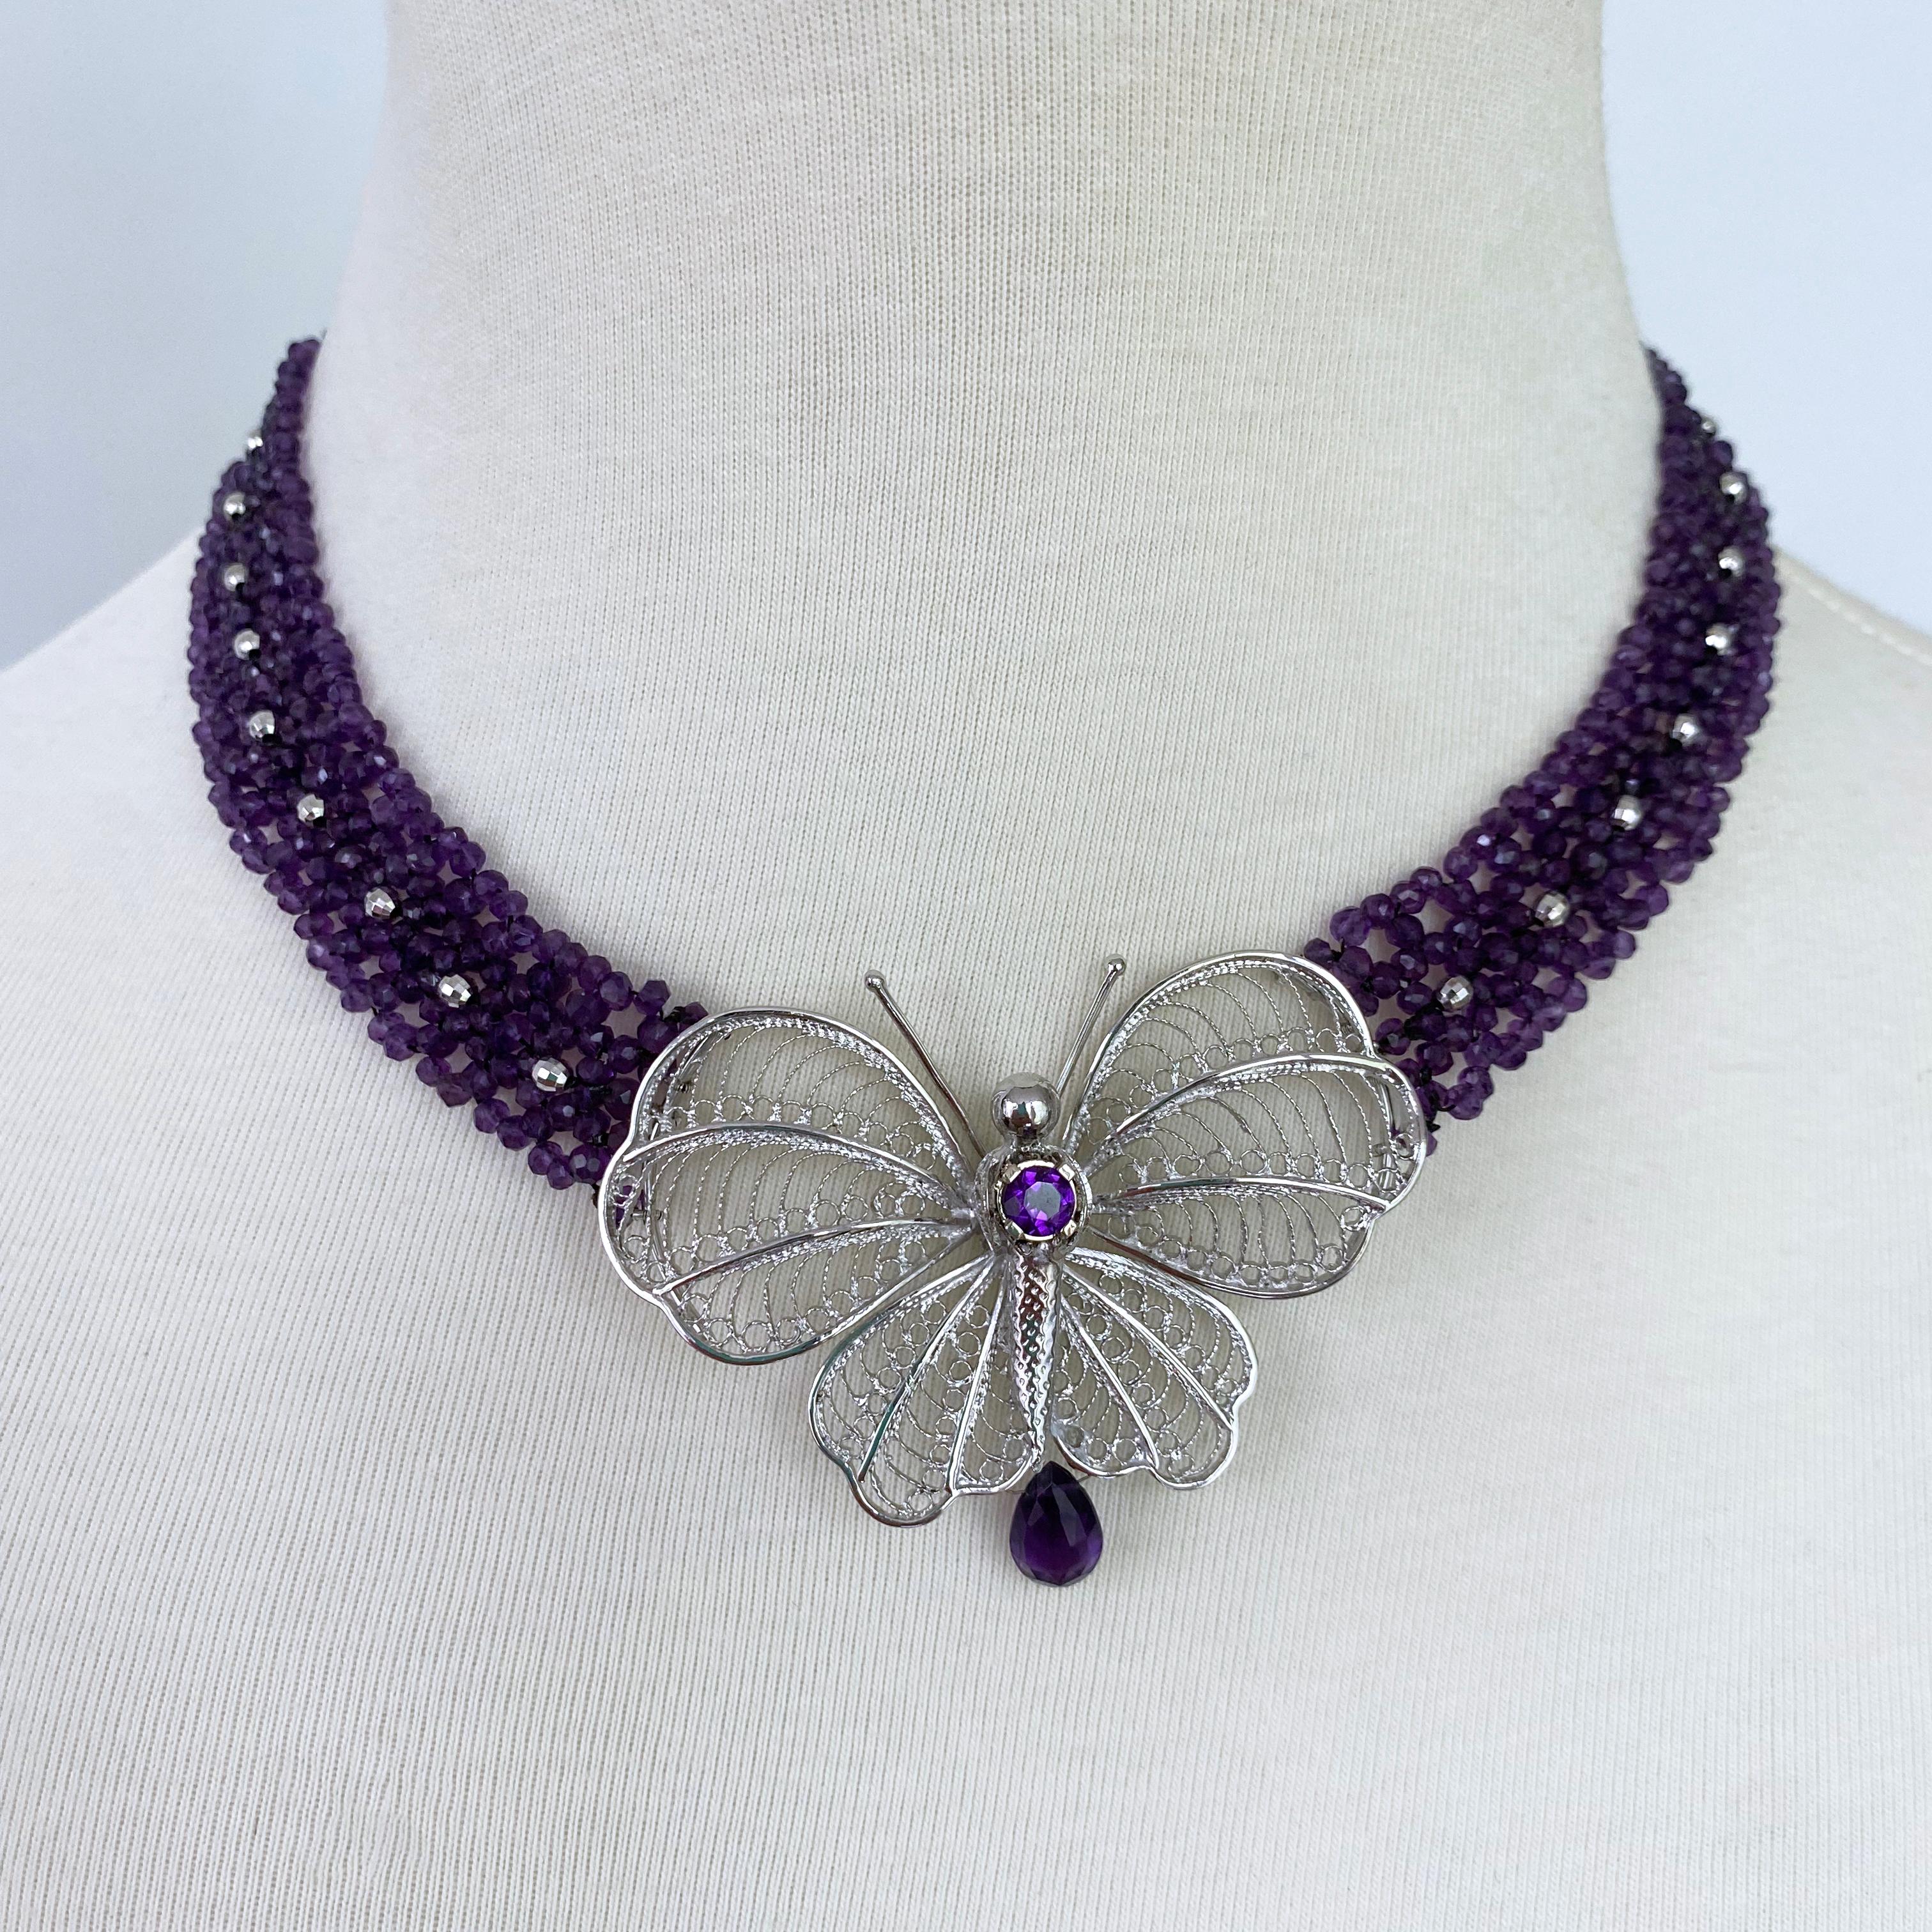 Amethyst  woven necklace with vintage silver butterfly, beads & clasp. 
1.5 mm amethyst beads interwoven with silver faceted beads. All Sterling Silver items  are white gold plated to prevent oxidation.
Intricately woven Amethyst beads arranged in a